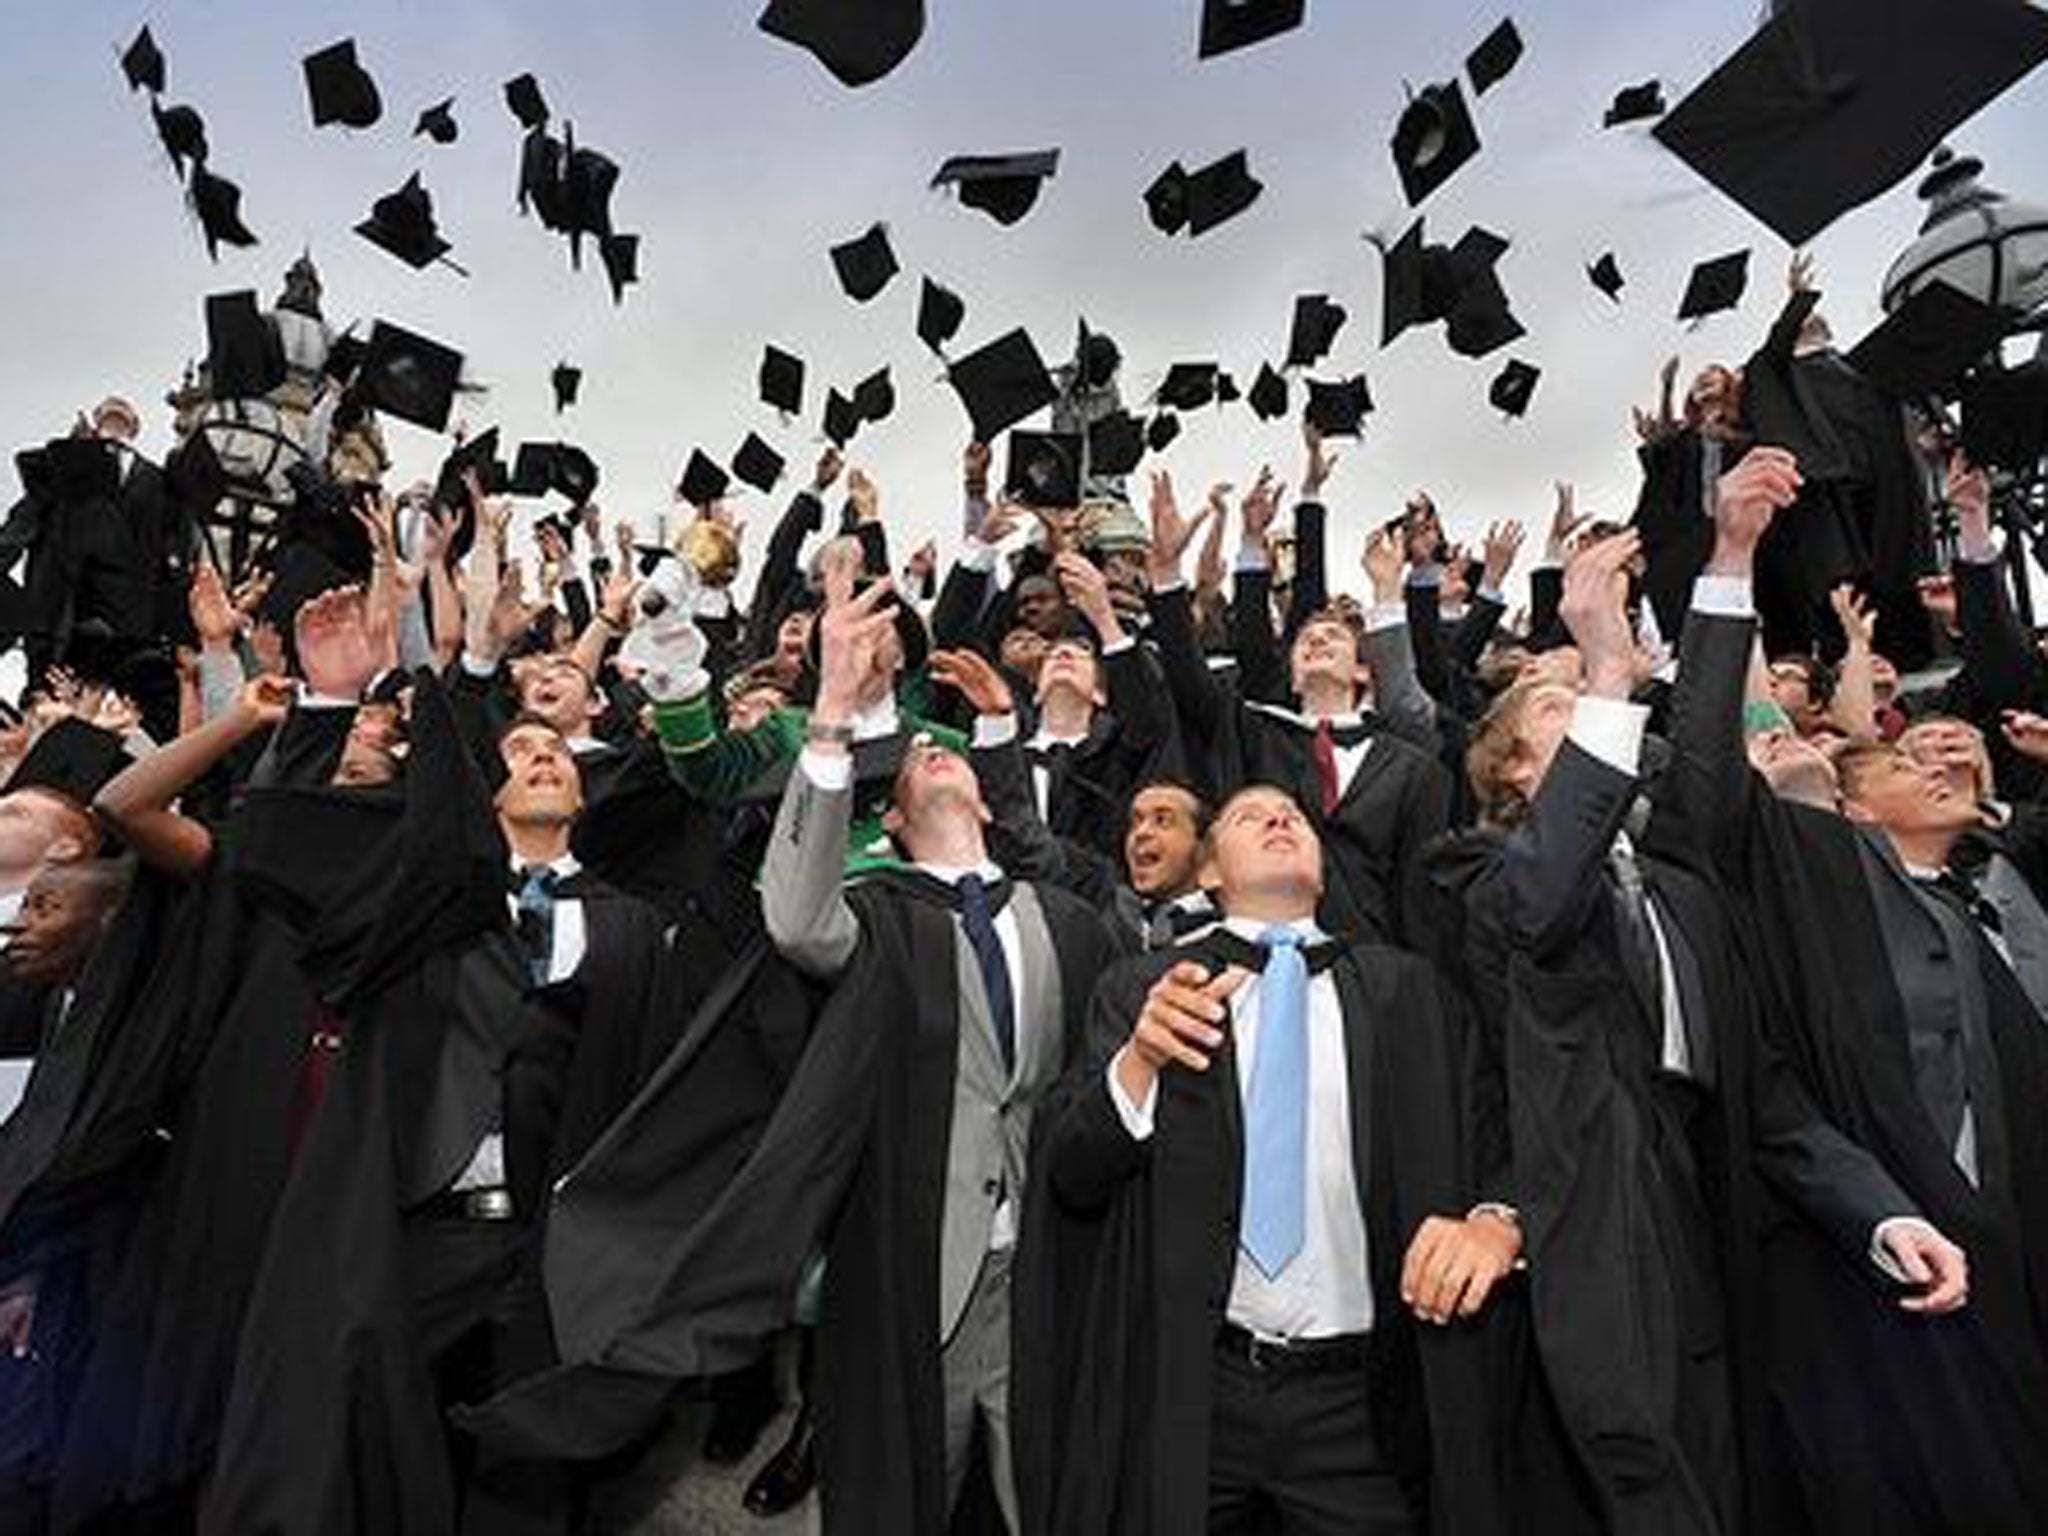 44 per cent of graduates believe they will have snapped up graduate-style employment by the time they leave university this summer